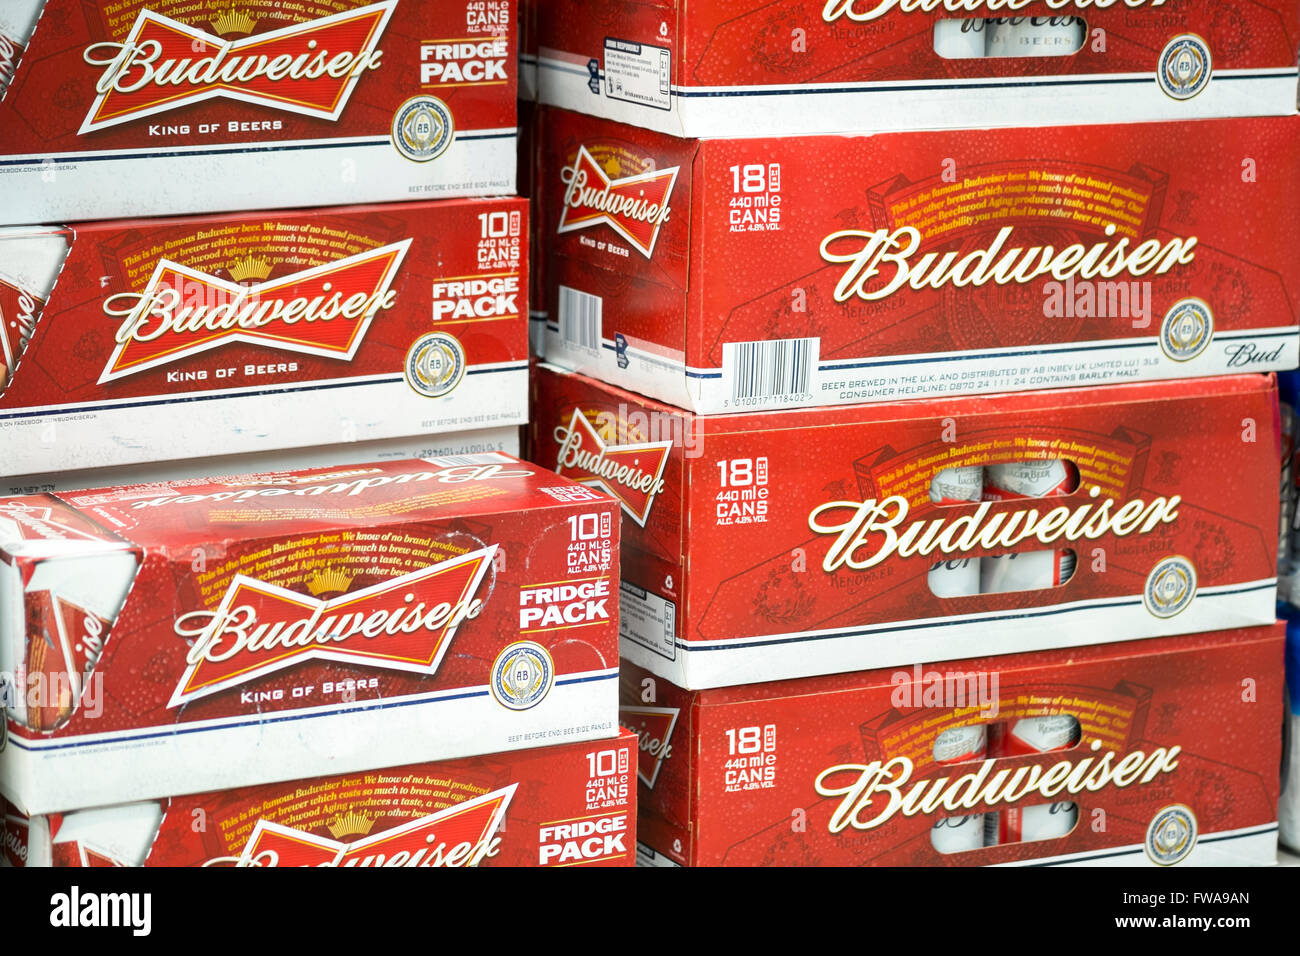 Budweiser beer for sale in a store, UK. Stock Photo